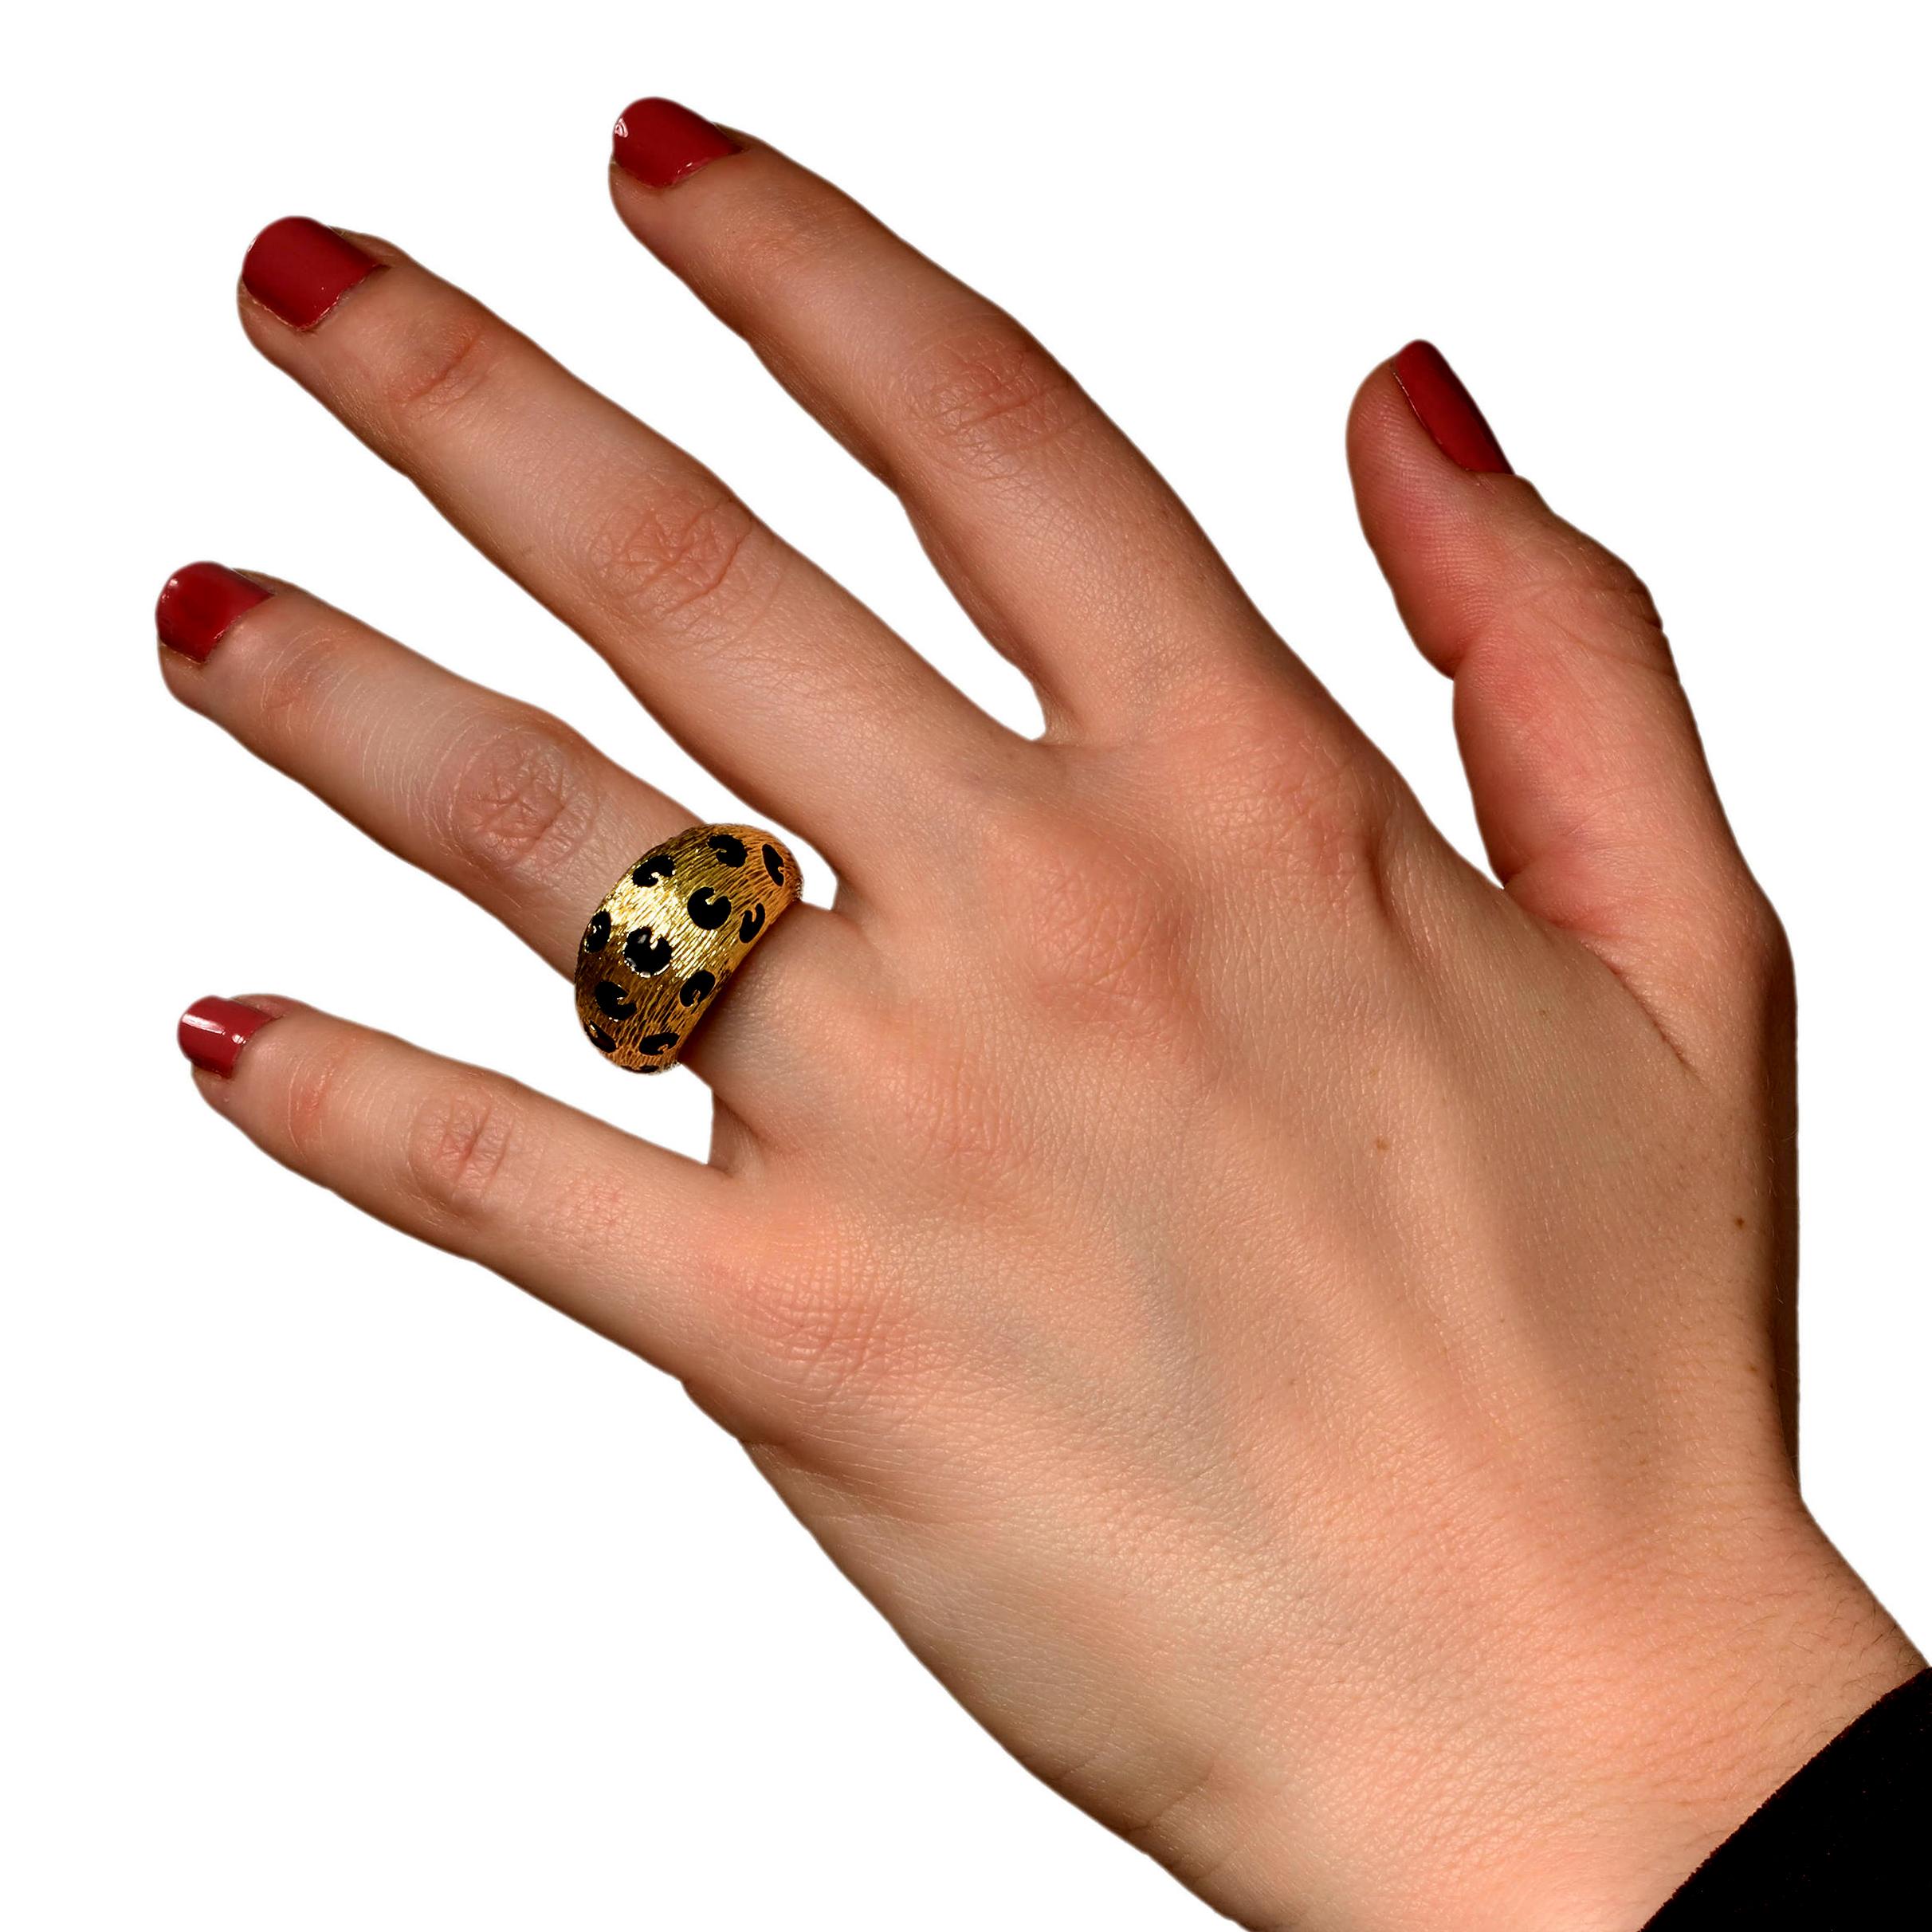 A fabulous vintage Fred of Paris ring showcasing leopard spots filled with black enamel and 18k yellow gold. The ring measures a size EU 48 and can be resized.